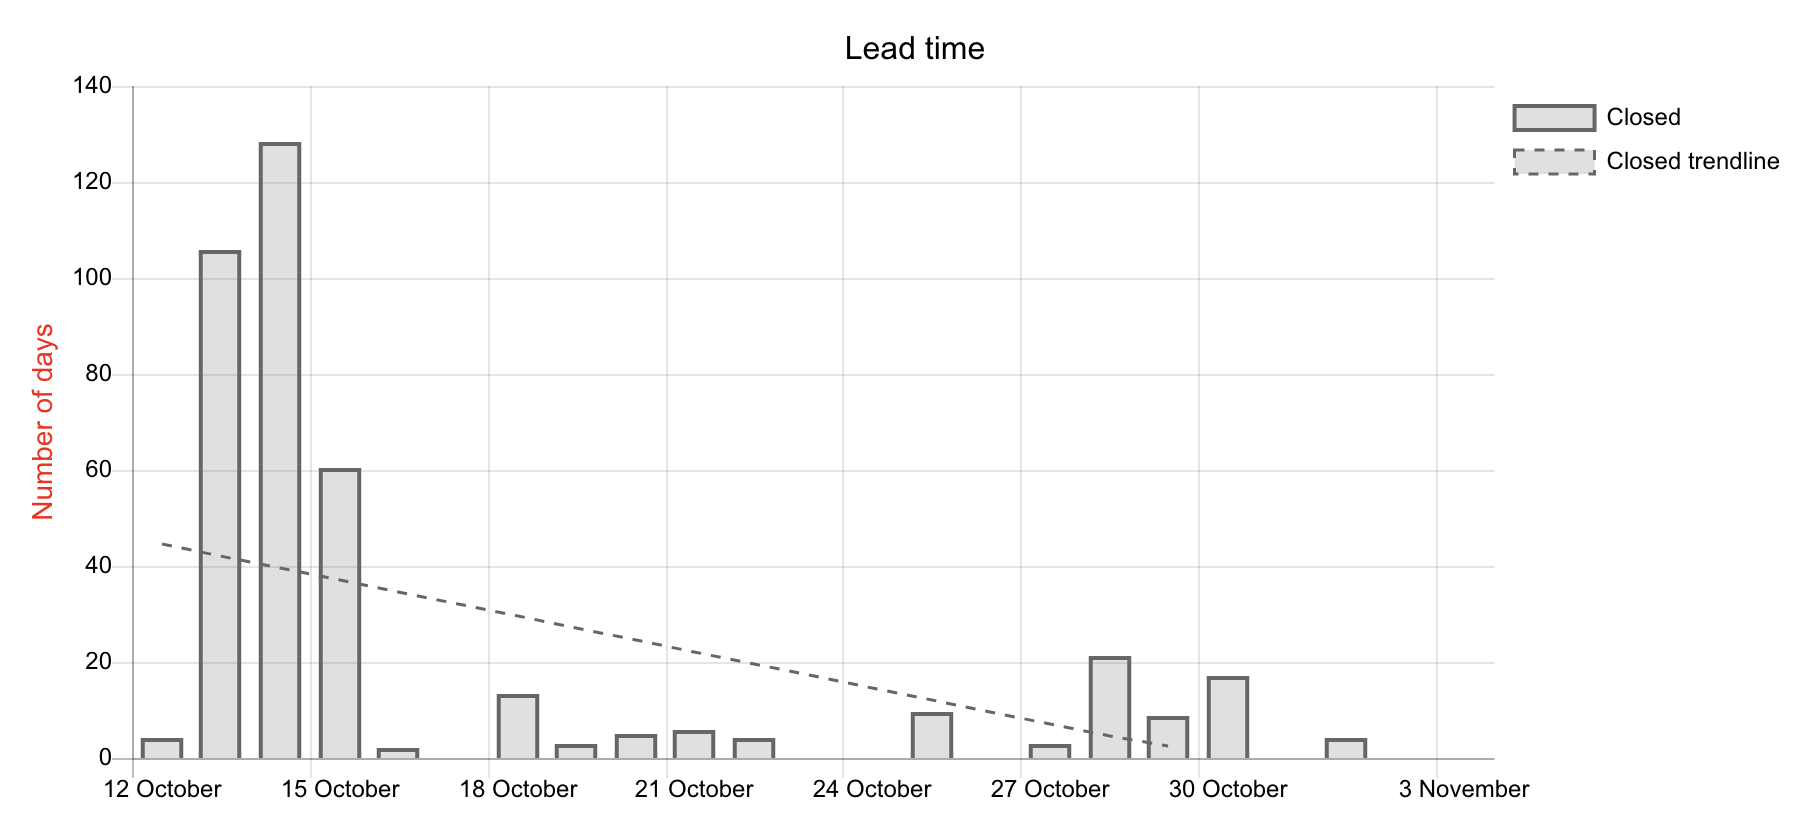 Lead time charts